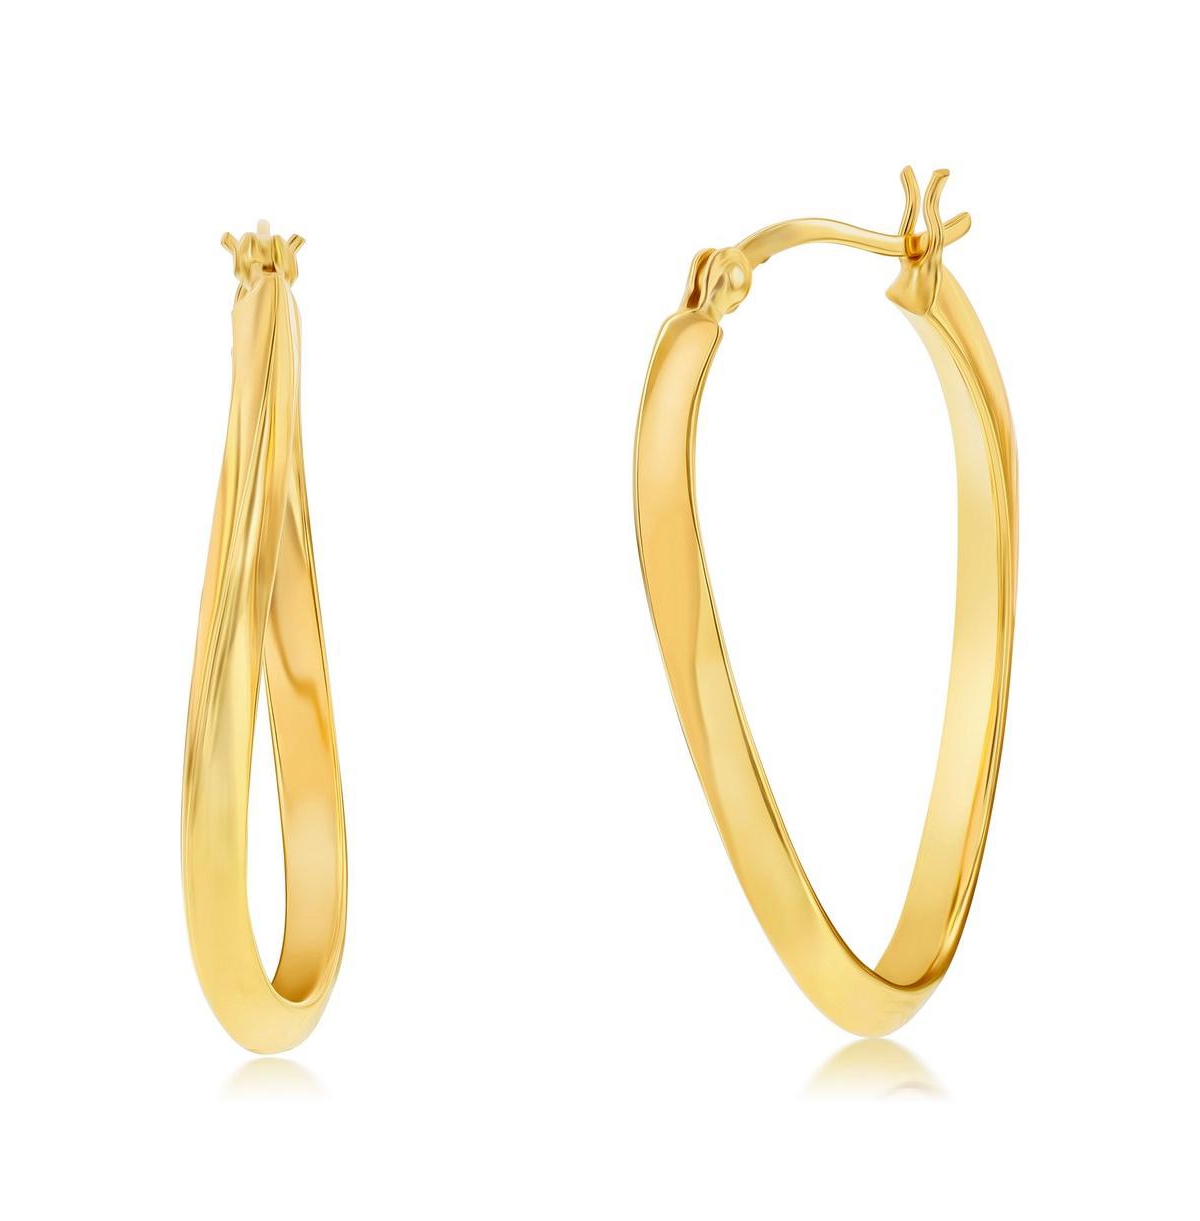 Sterling Silver or Gold Plated over Sterling Silver 35mm Oval Twist Hoop Earrings - Gold